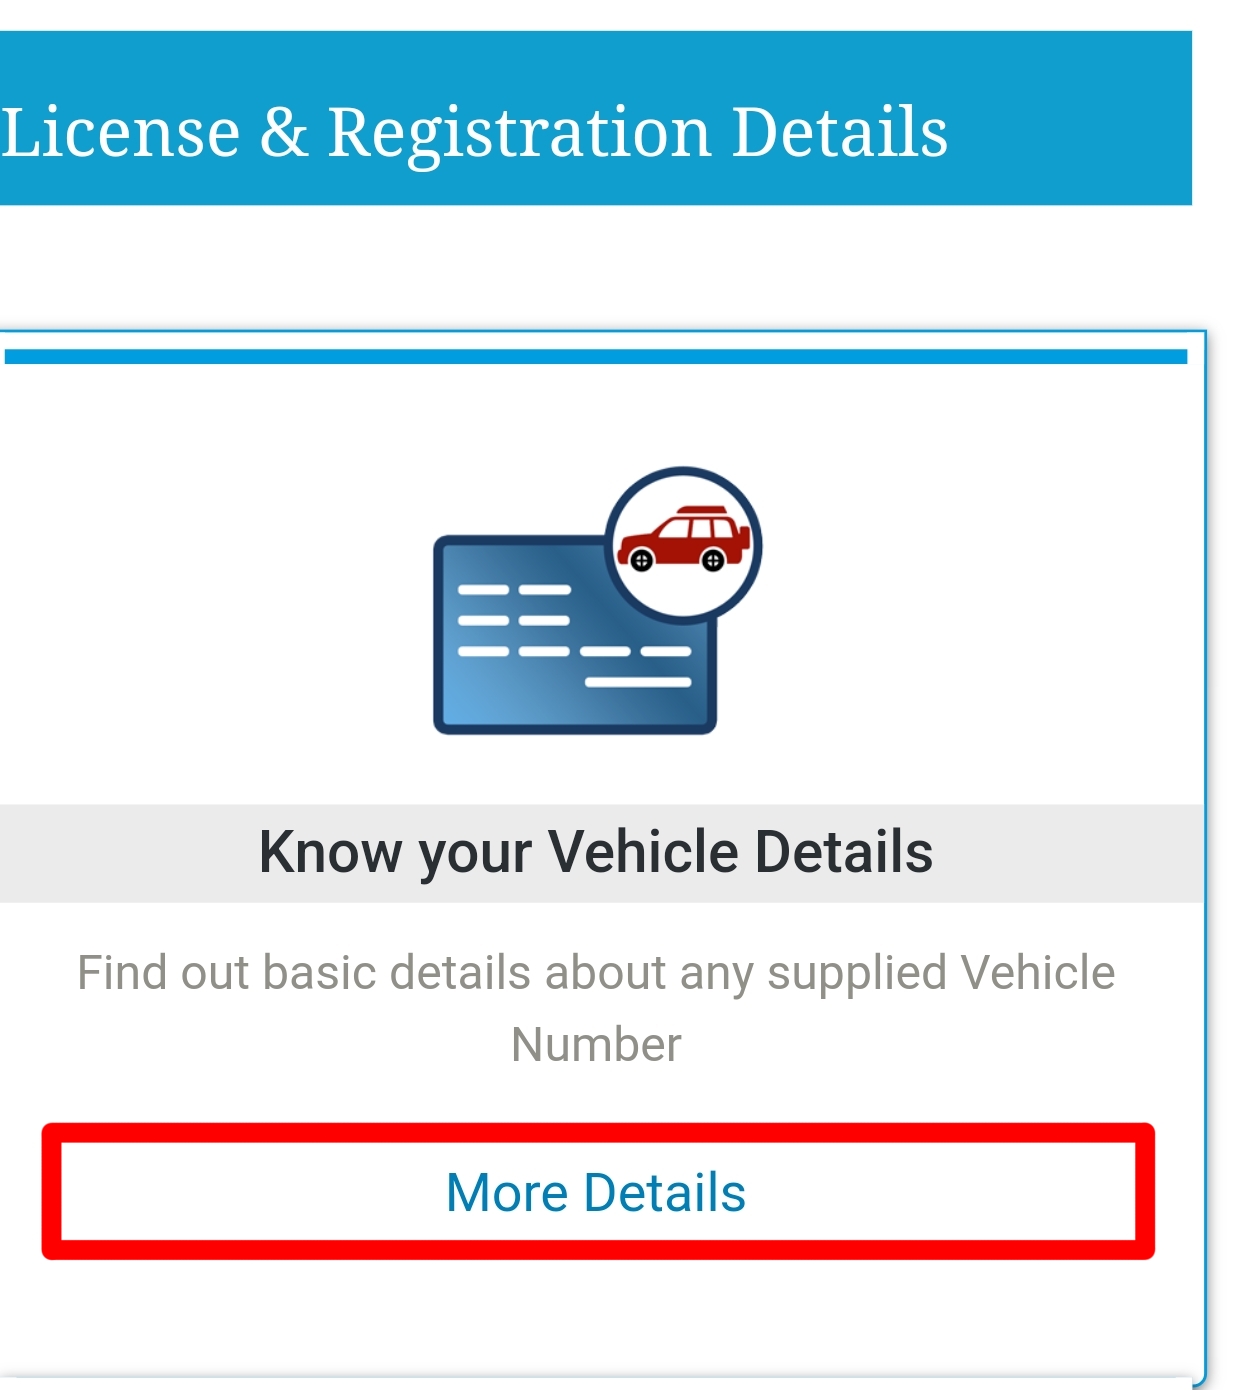 Know Your Vehicle Details